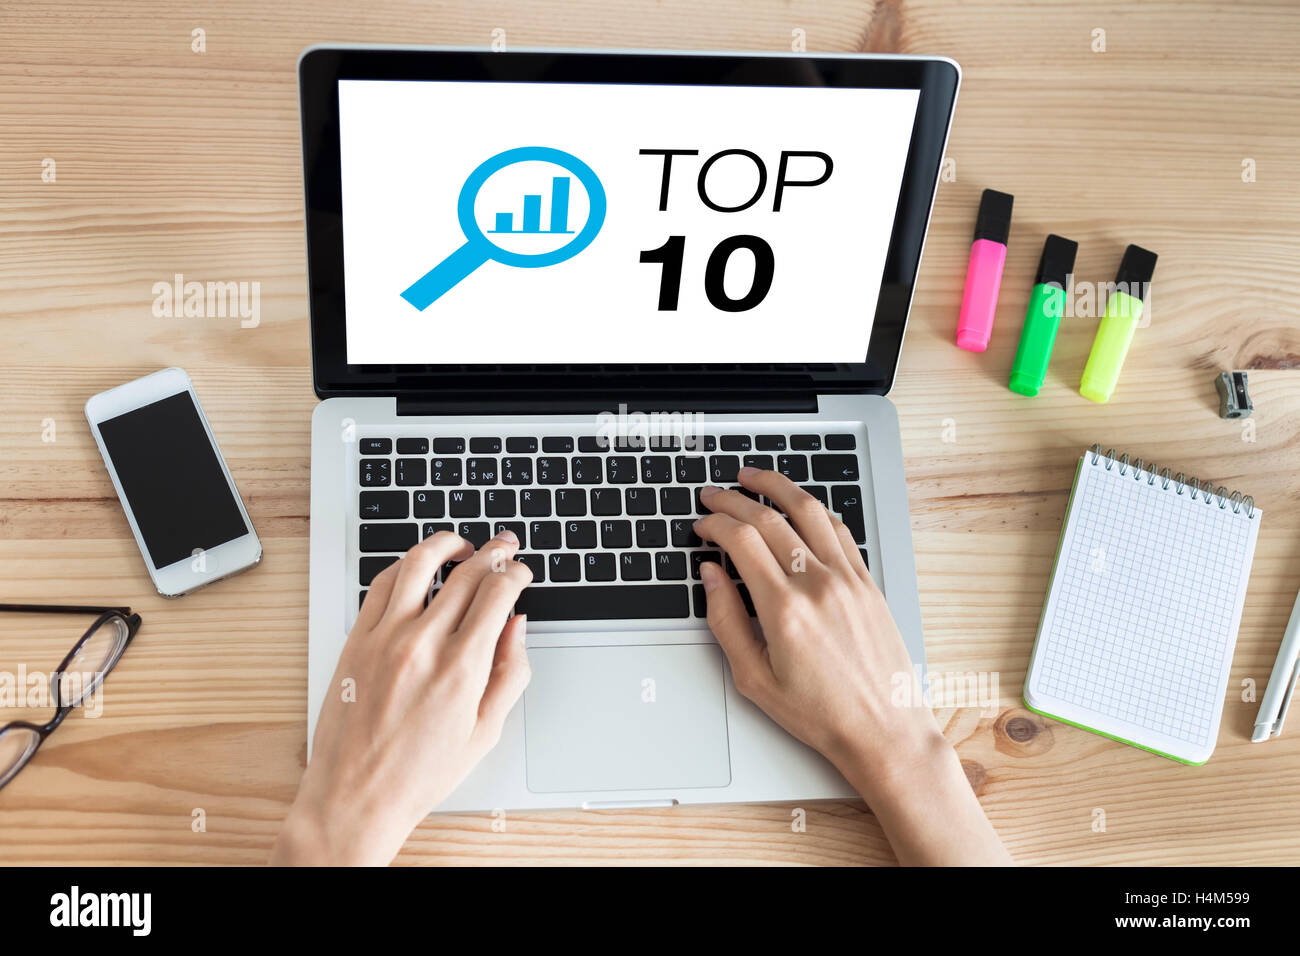 Top 10 list website on the screen of laptop computer with hands typing on keyboard Stock Photo